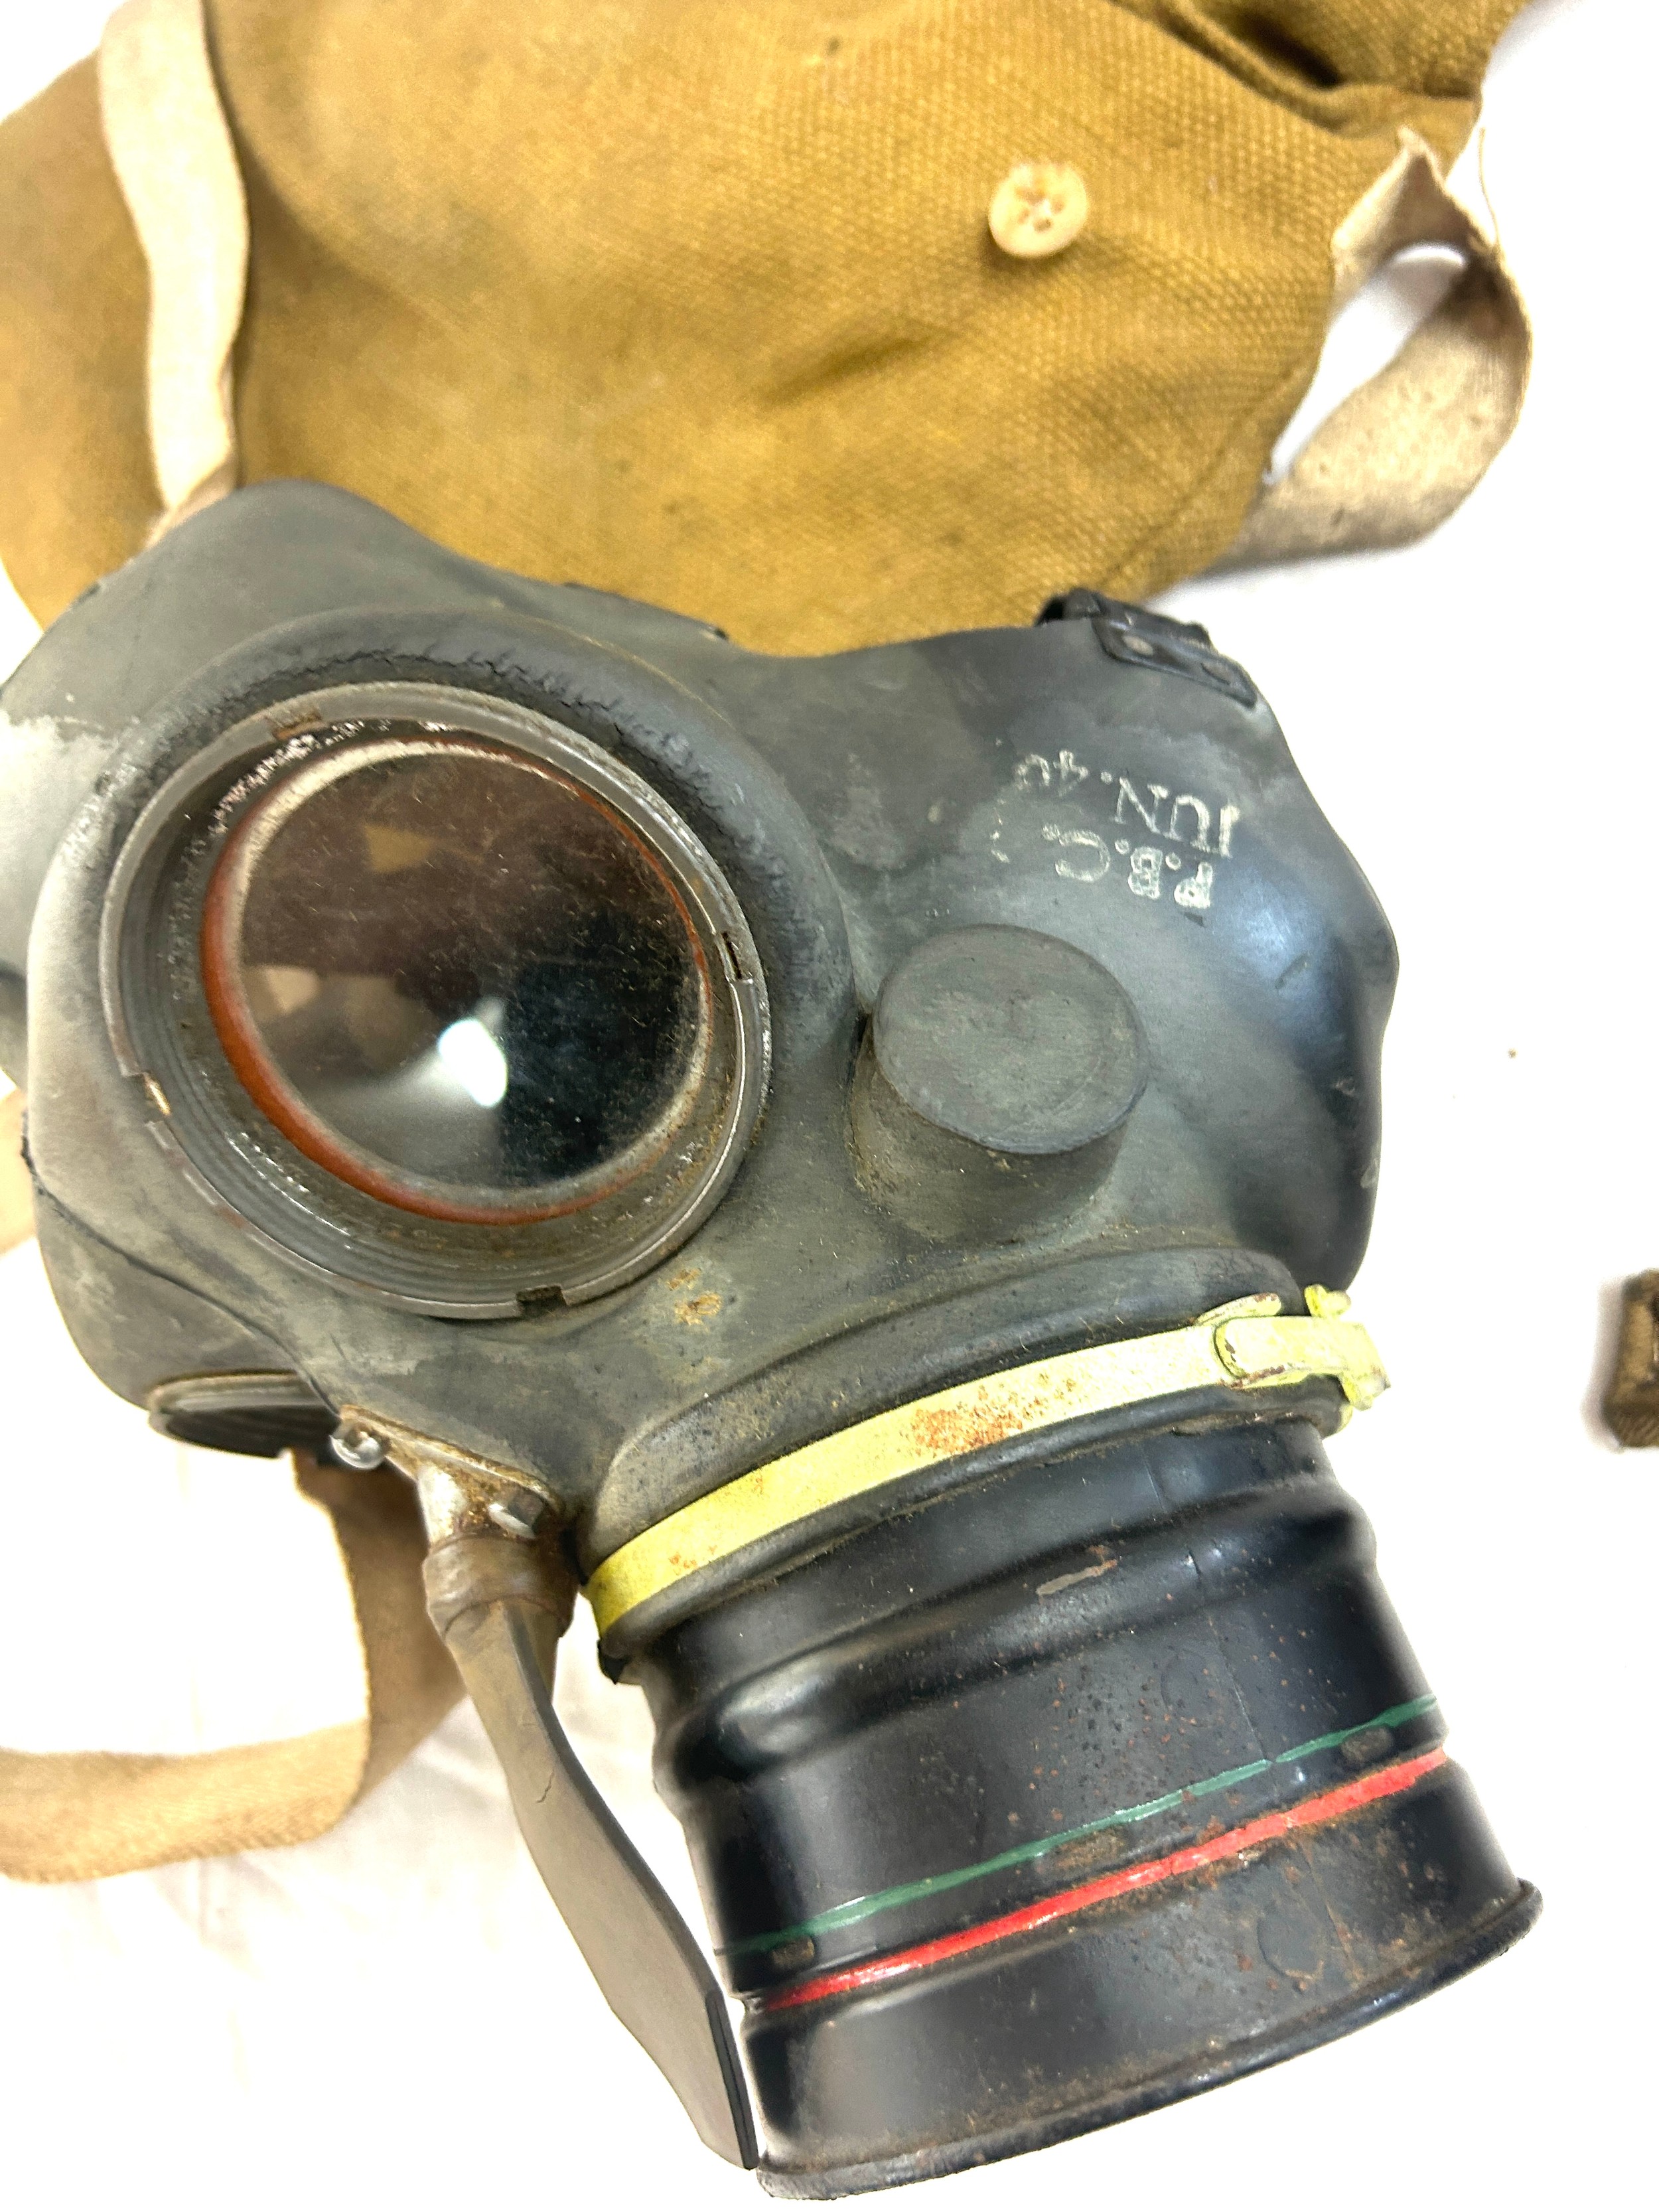 WW2 Wardens helmet and gas mask with bag - Image 2 of 5